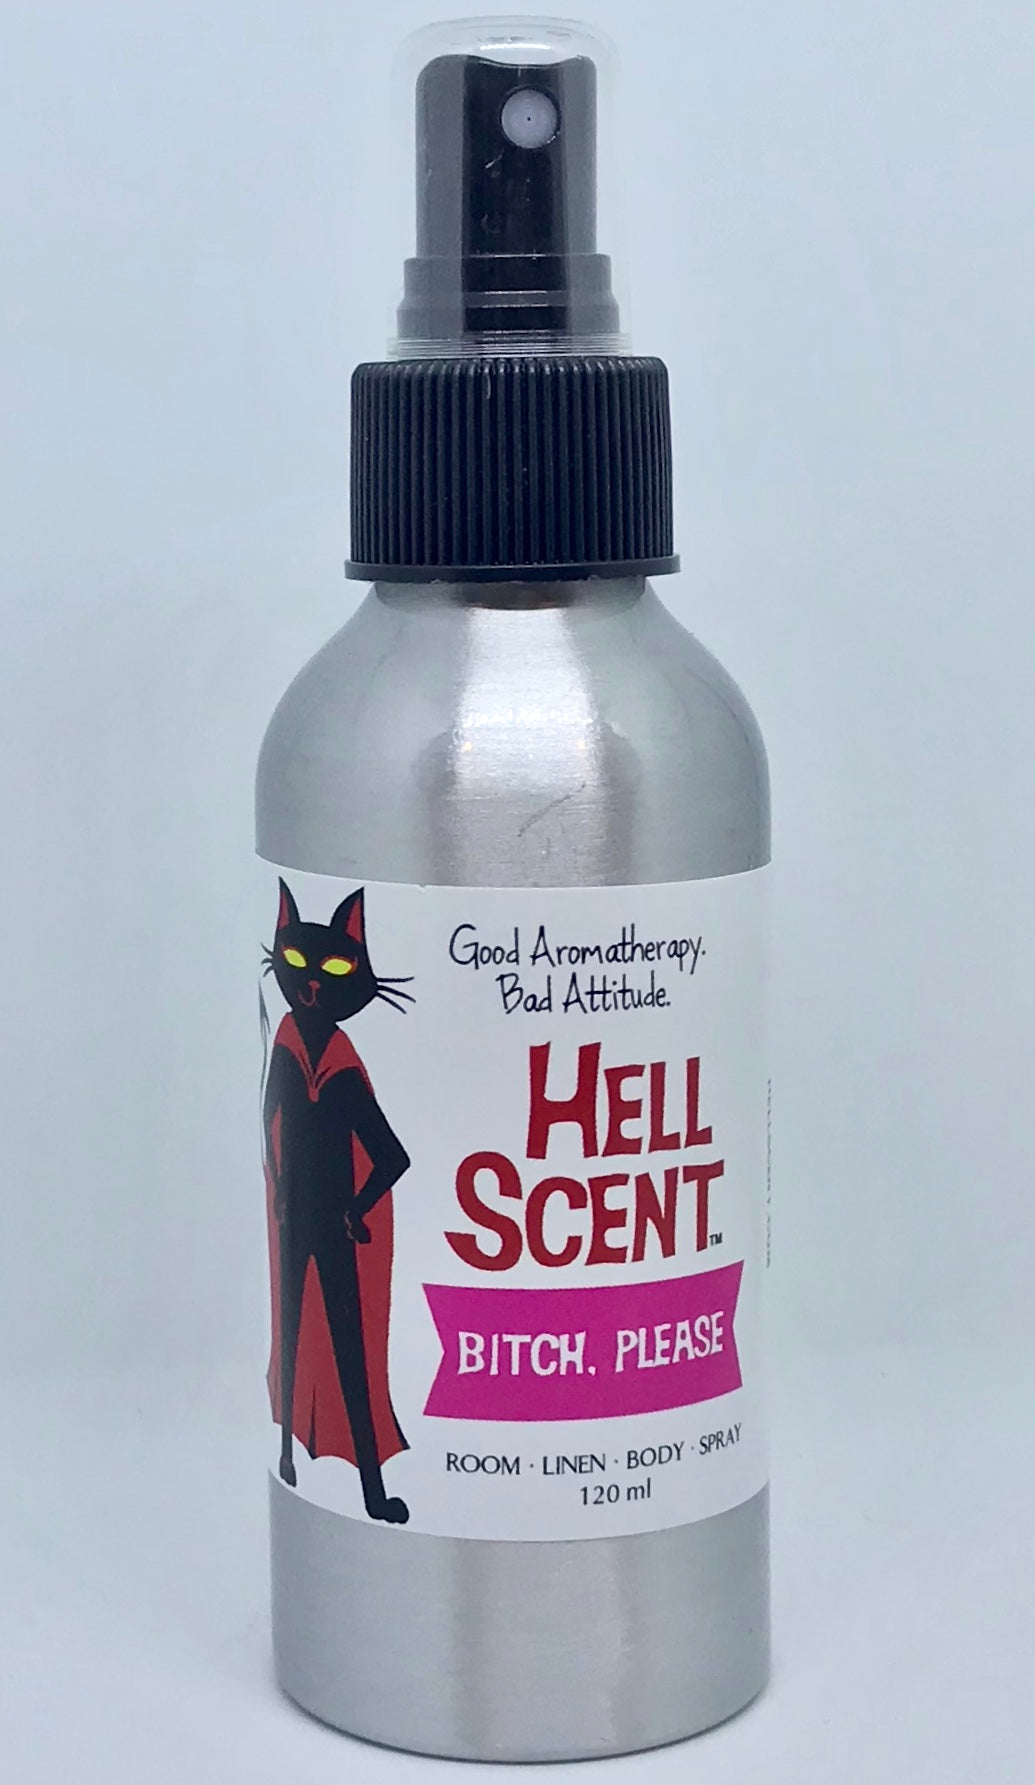 Bitch, Please - Room, Body & Linen Spray – Hell Scent Aromatherapy